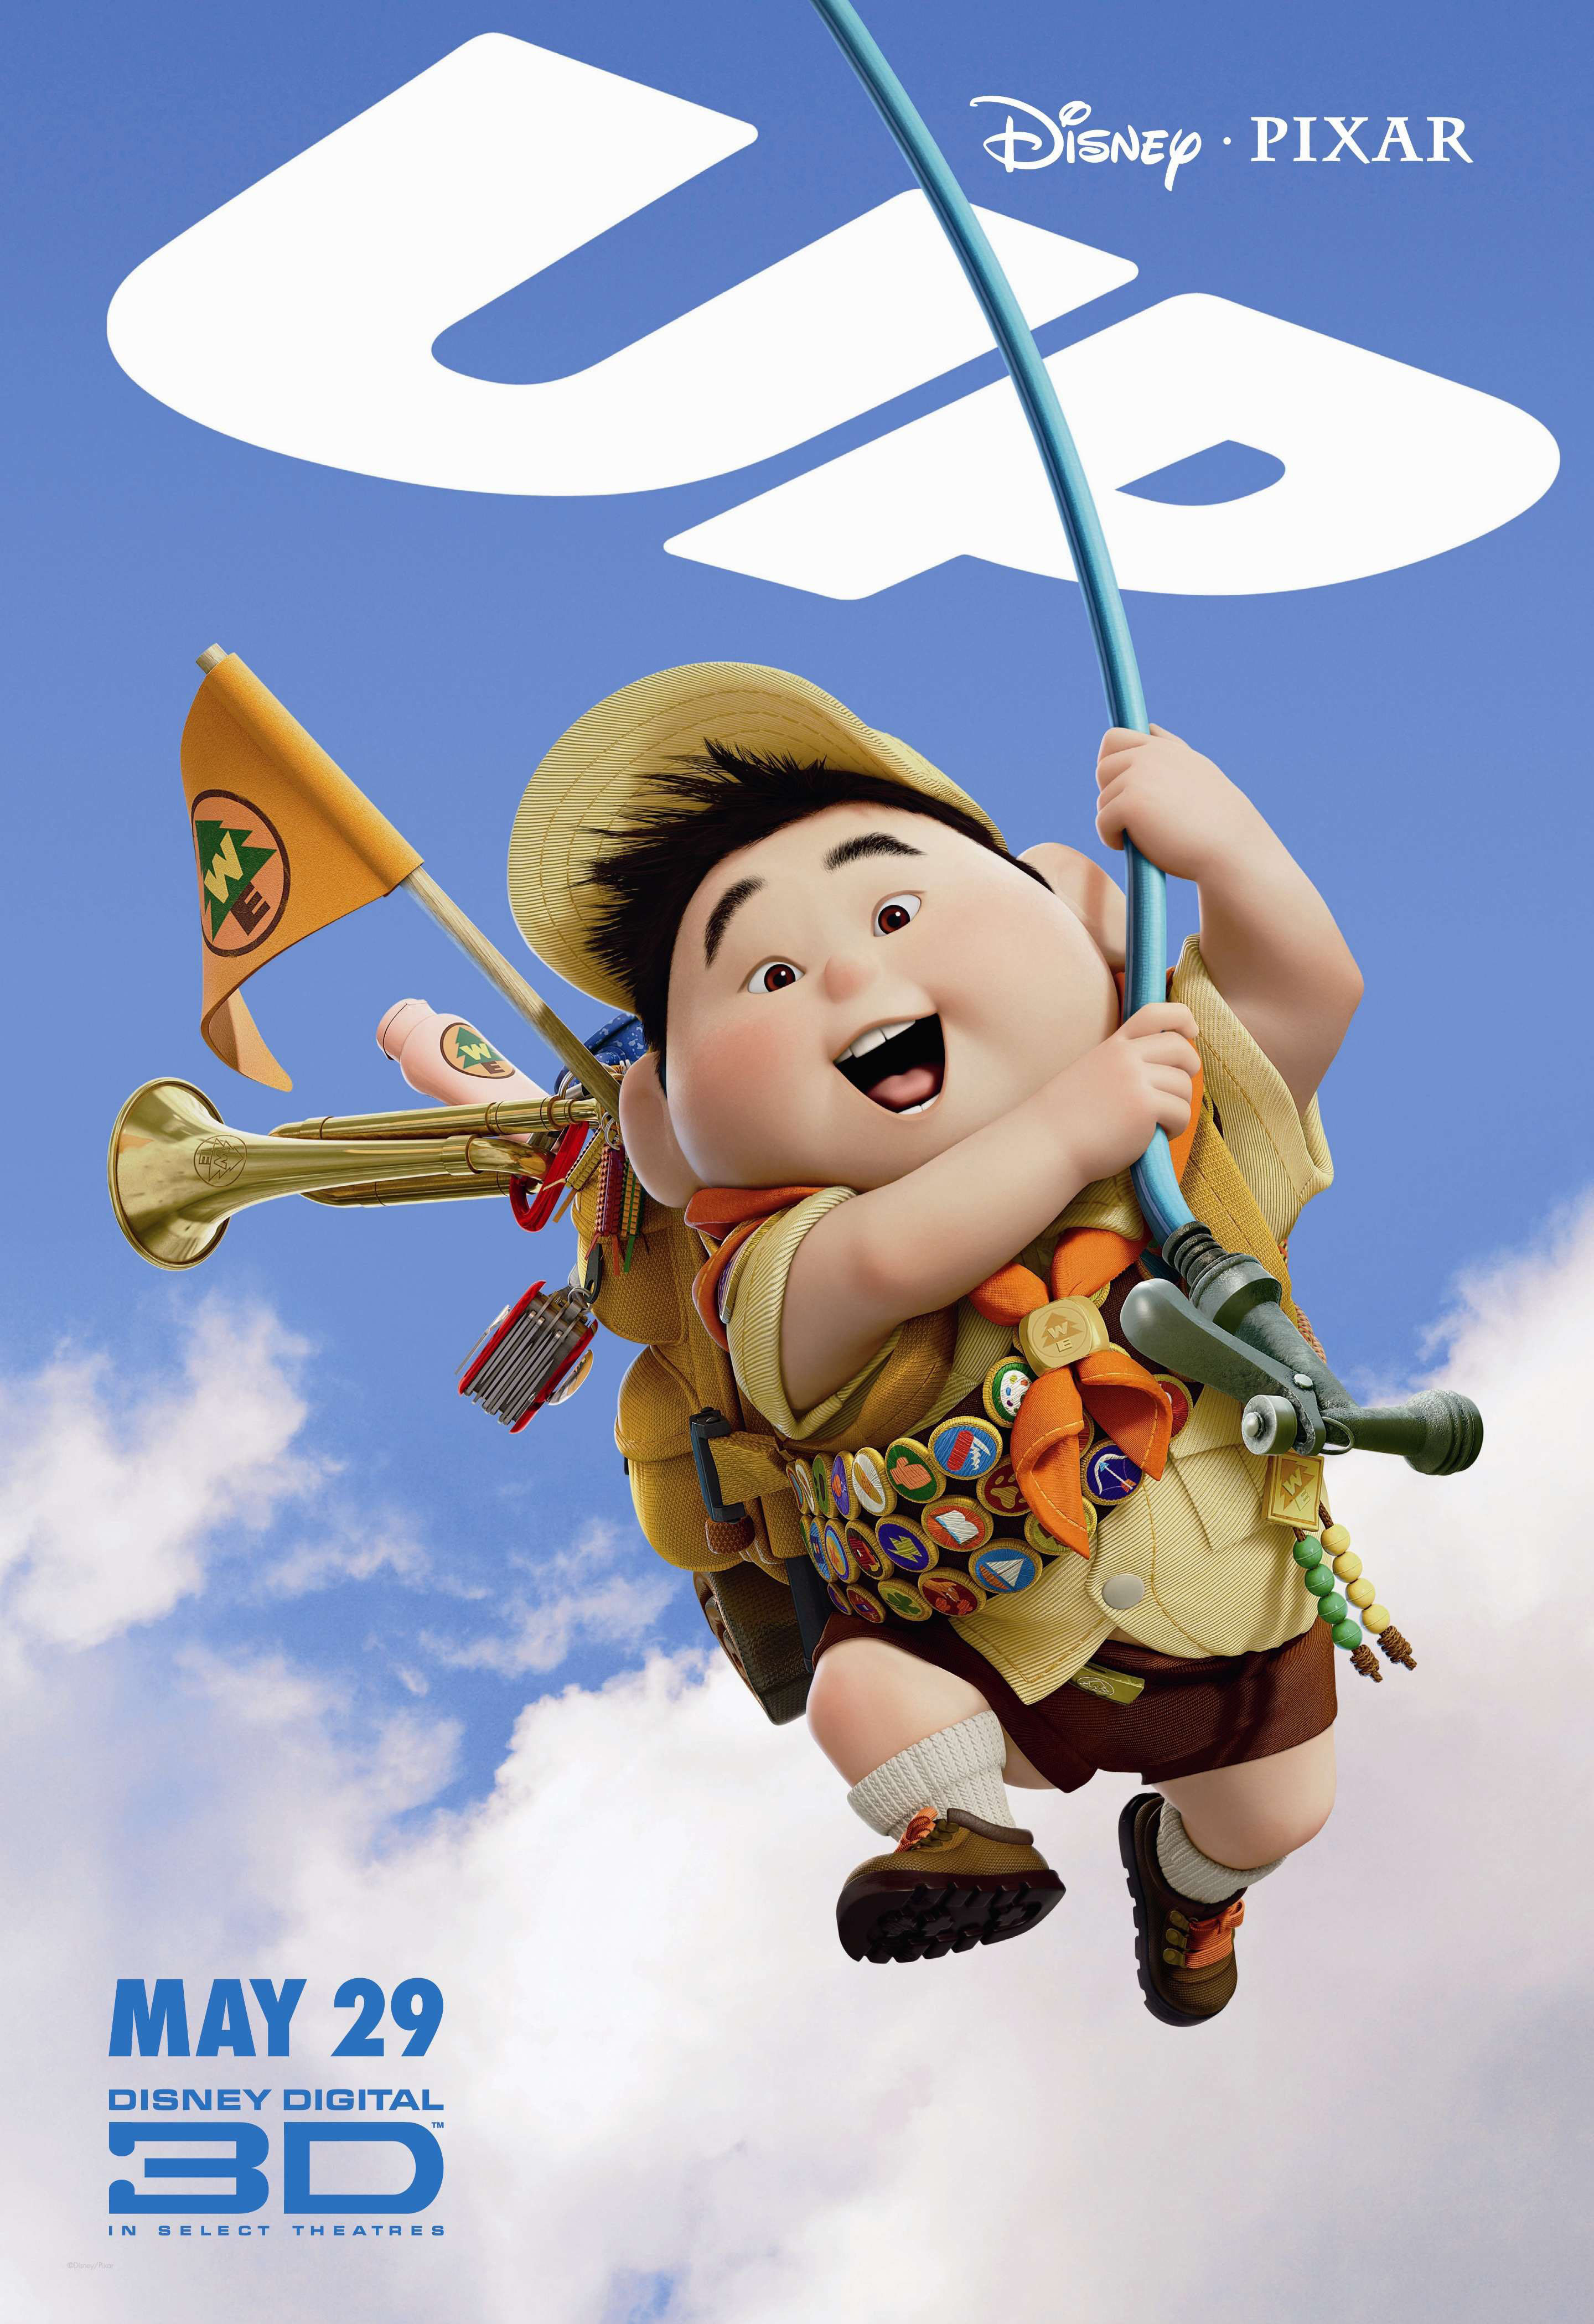 Poster image for the Pixar film Up, featuring a boy hanging onto a garden hose as he flies into the clouds